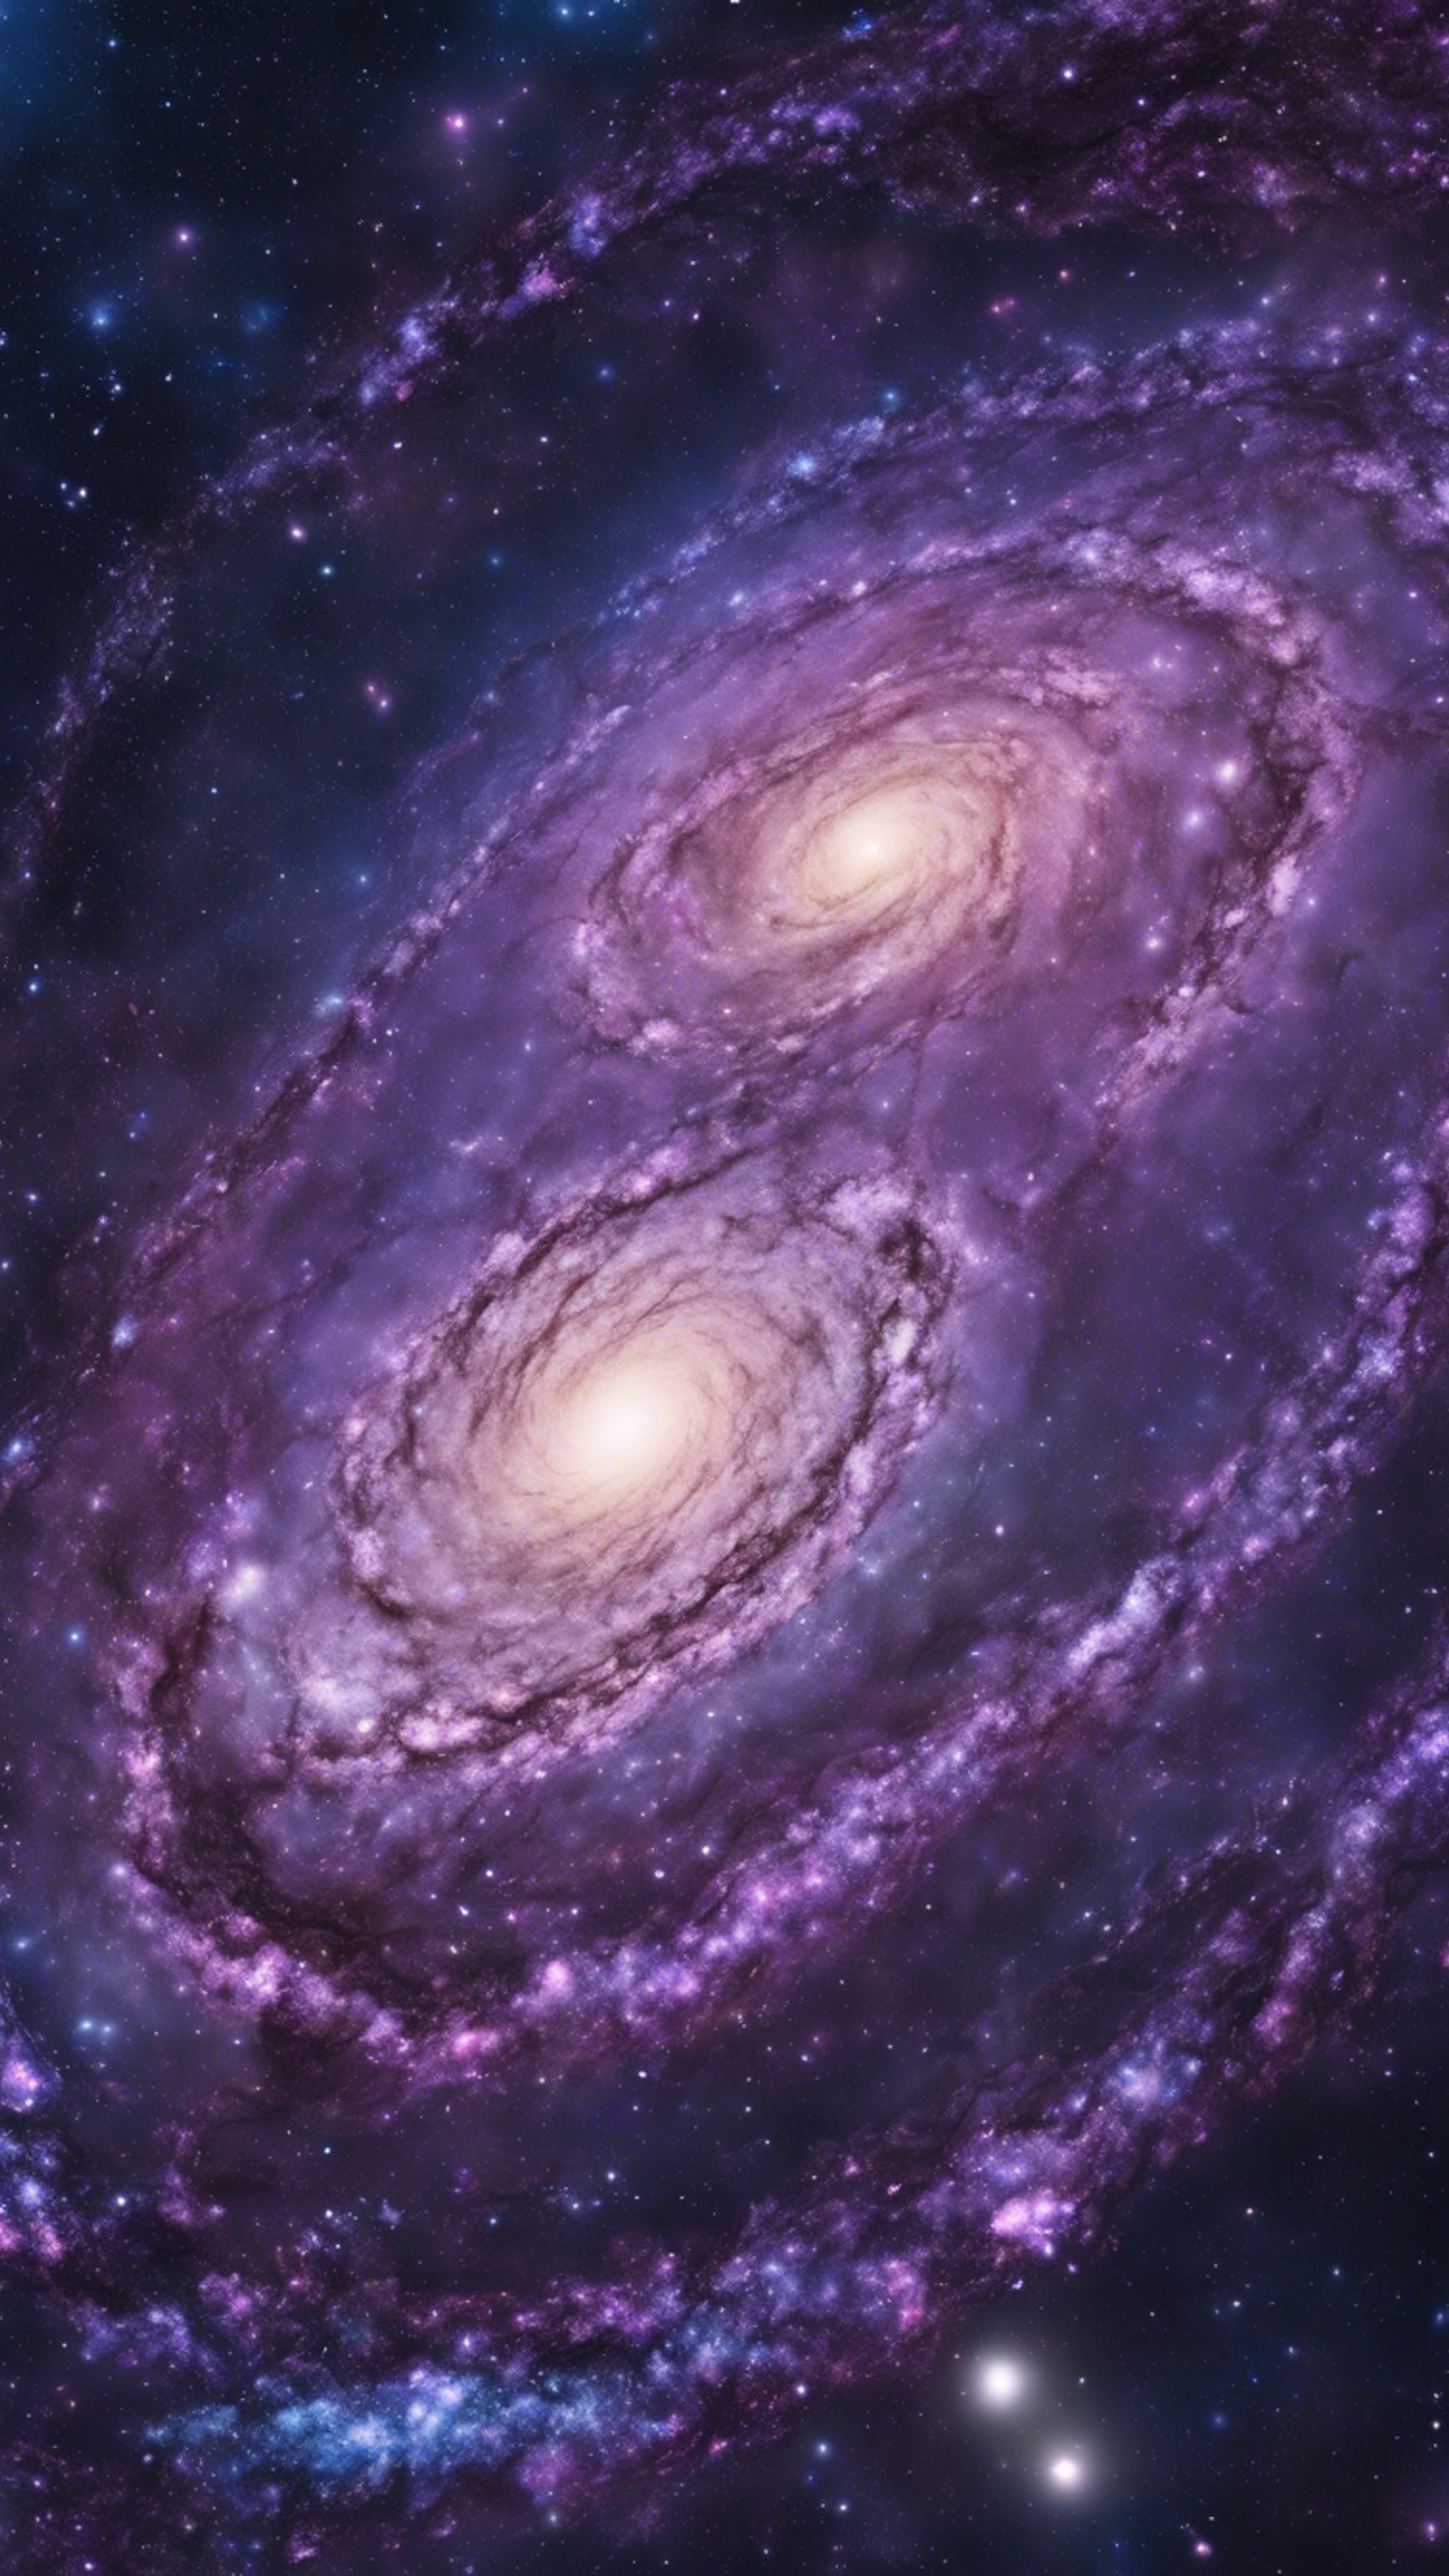 A spectacular galaxy with swirling patterns of purples and blues. Papel de parede[e57f5ee32b94469cbfb9]